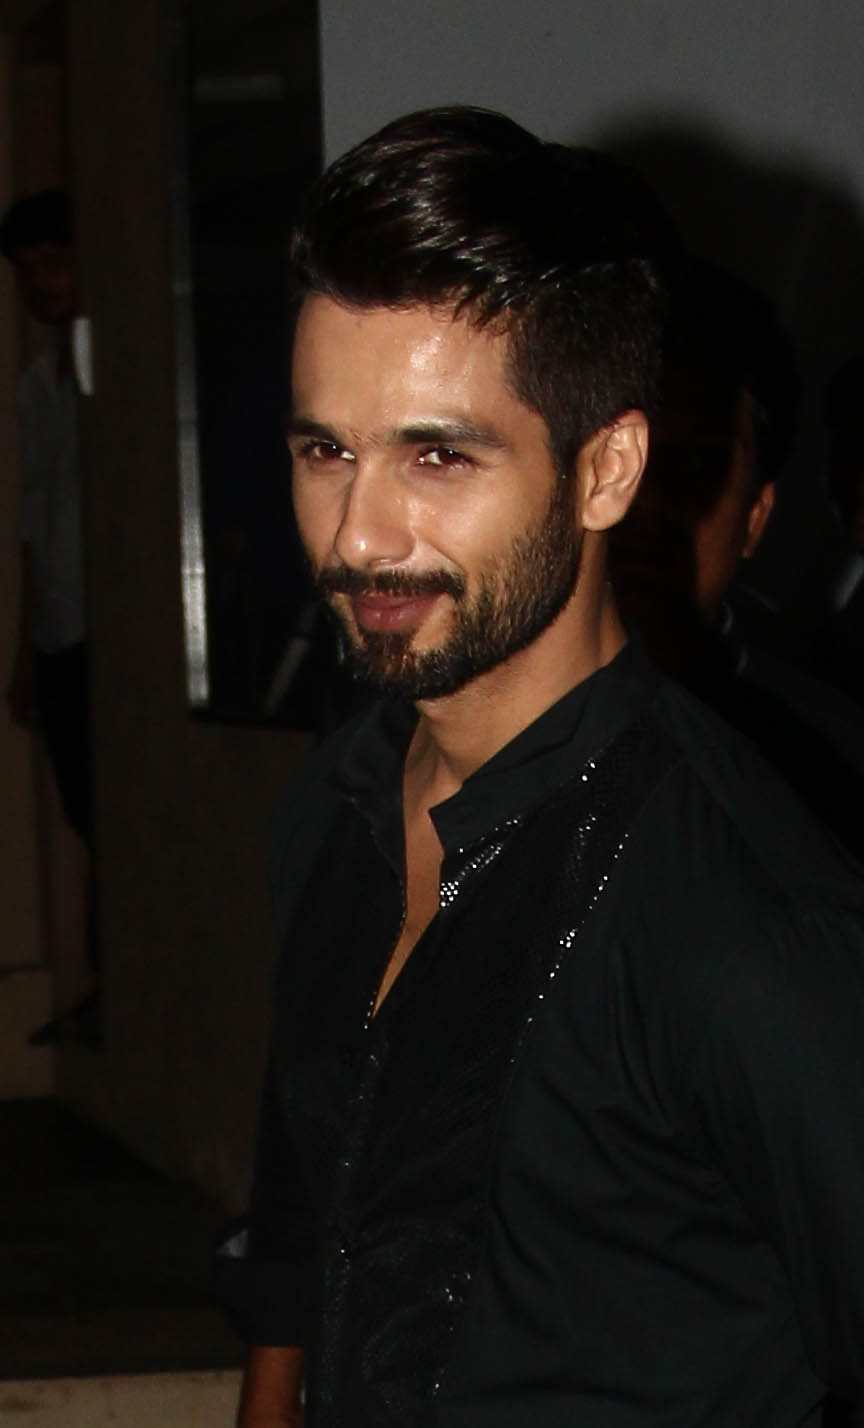 How many looks did Shahid Kapoor try before finalising one for 'Udta Punjab '?